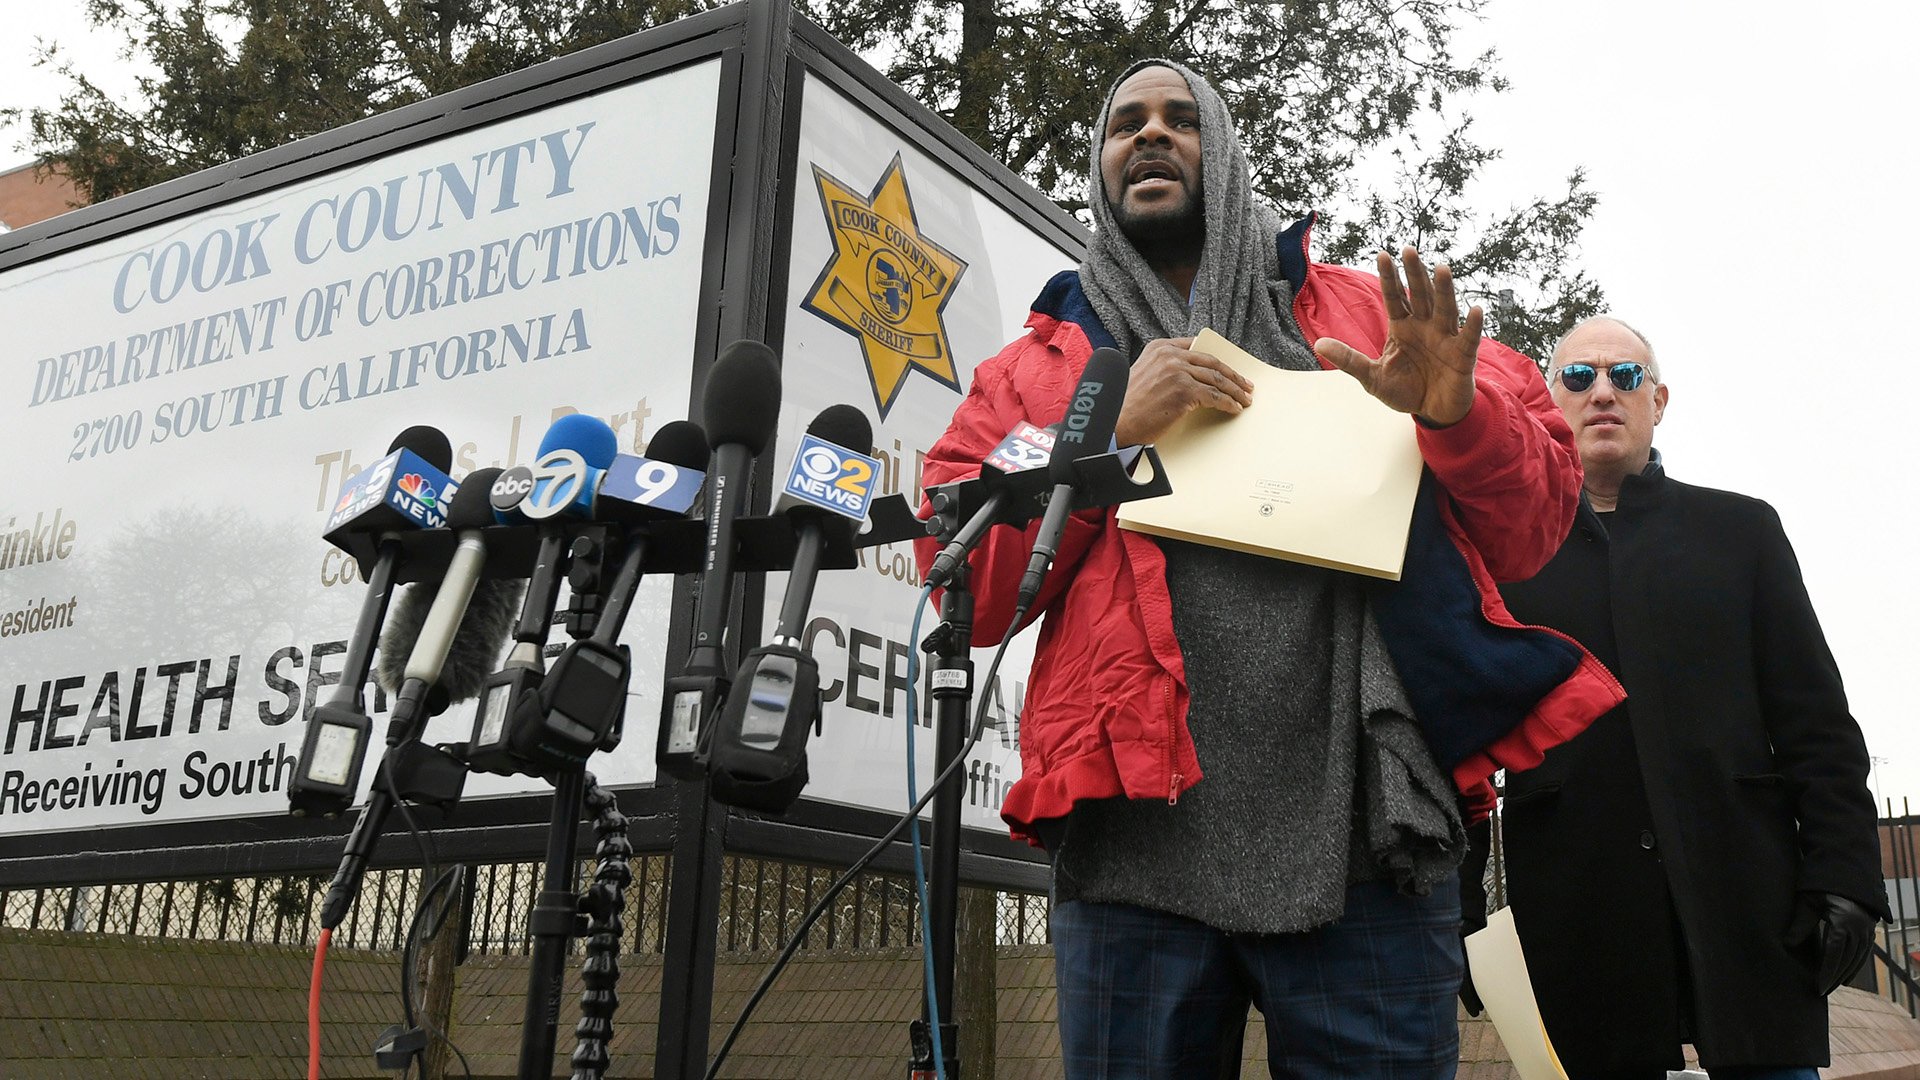 Singer R. Kelly speaks to the media after being released from Cook County Jail on March 9, 2019, while his attorney Steve Greenberg, right, looks on. (AP Photo / Paul Beaty)